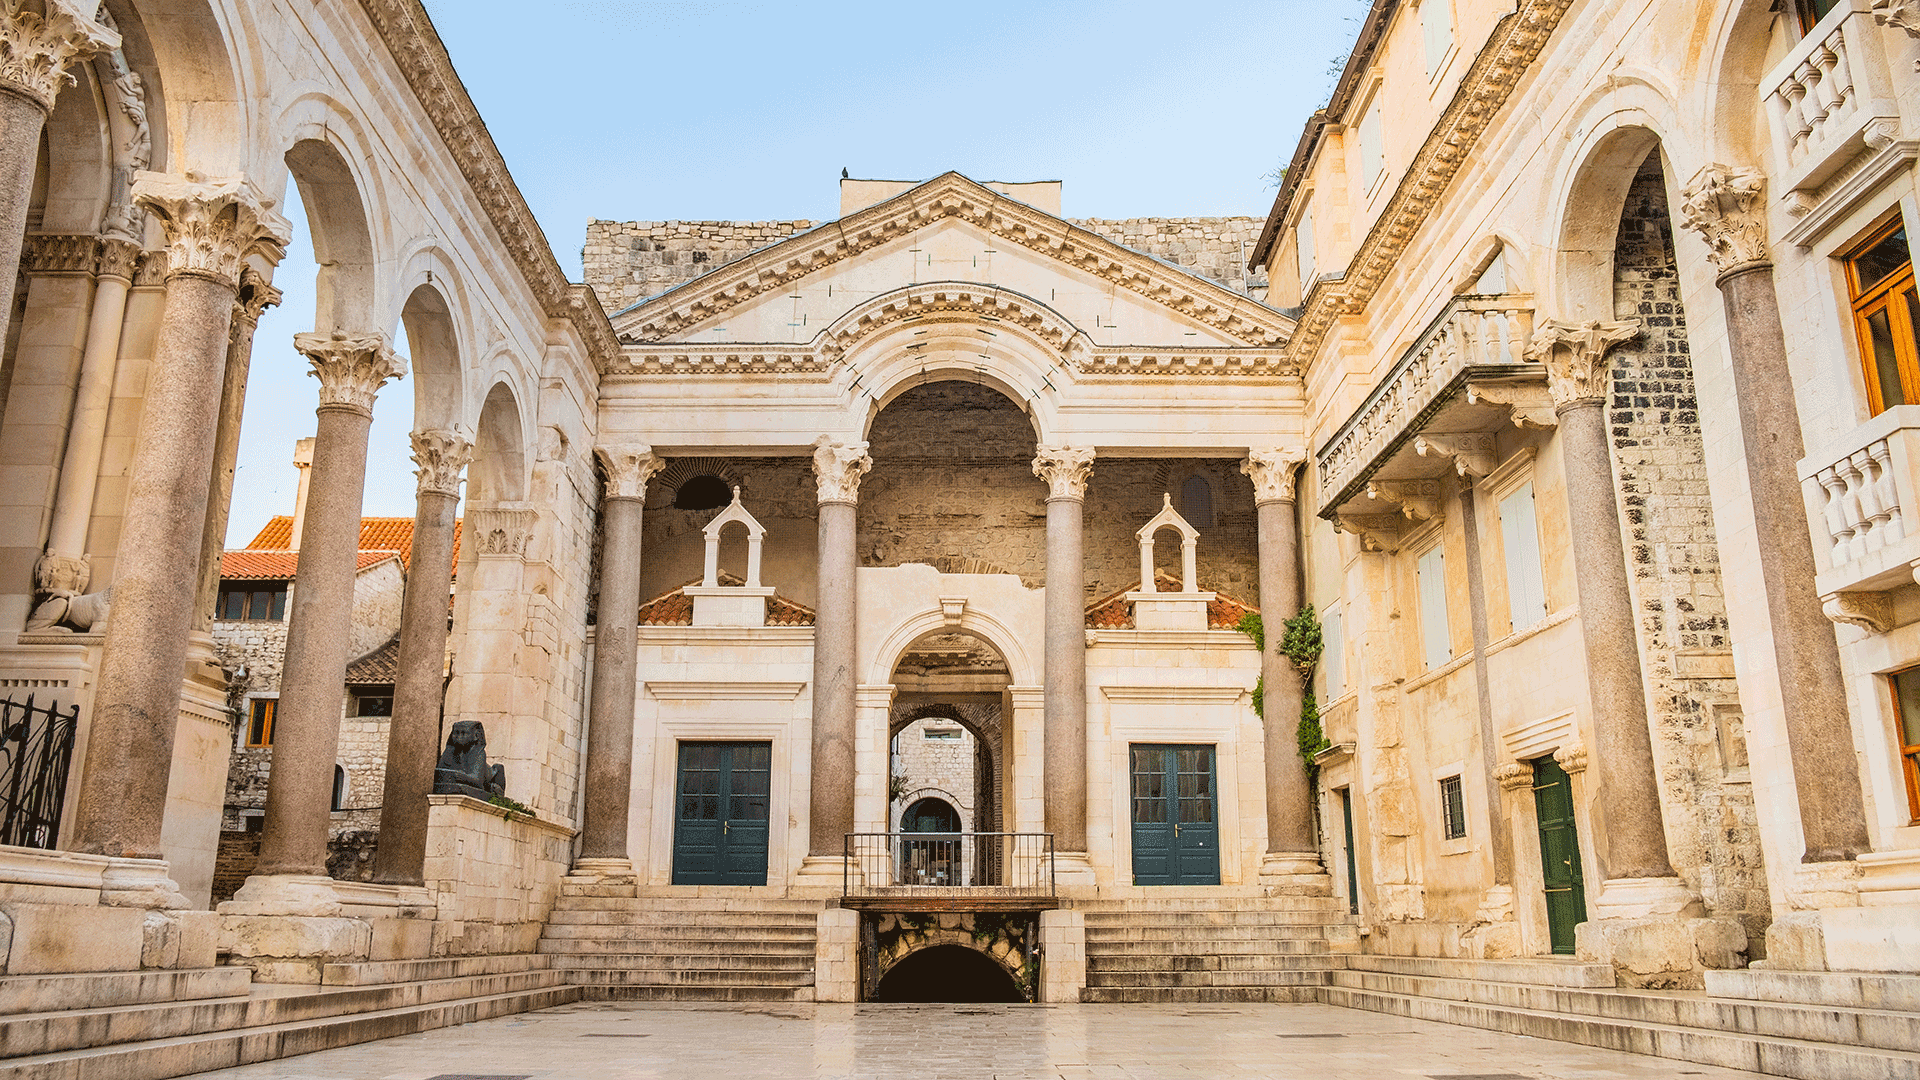 Remains of Roman emperor Diocletians Palace in Split, Croatia